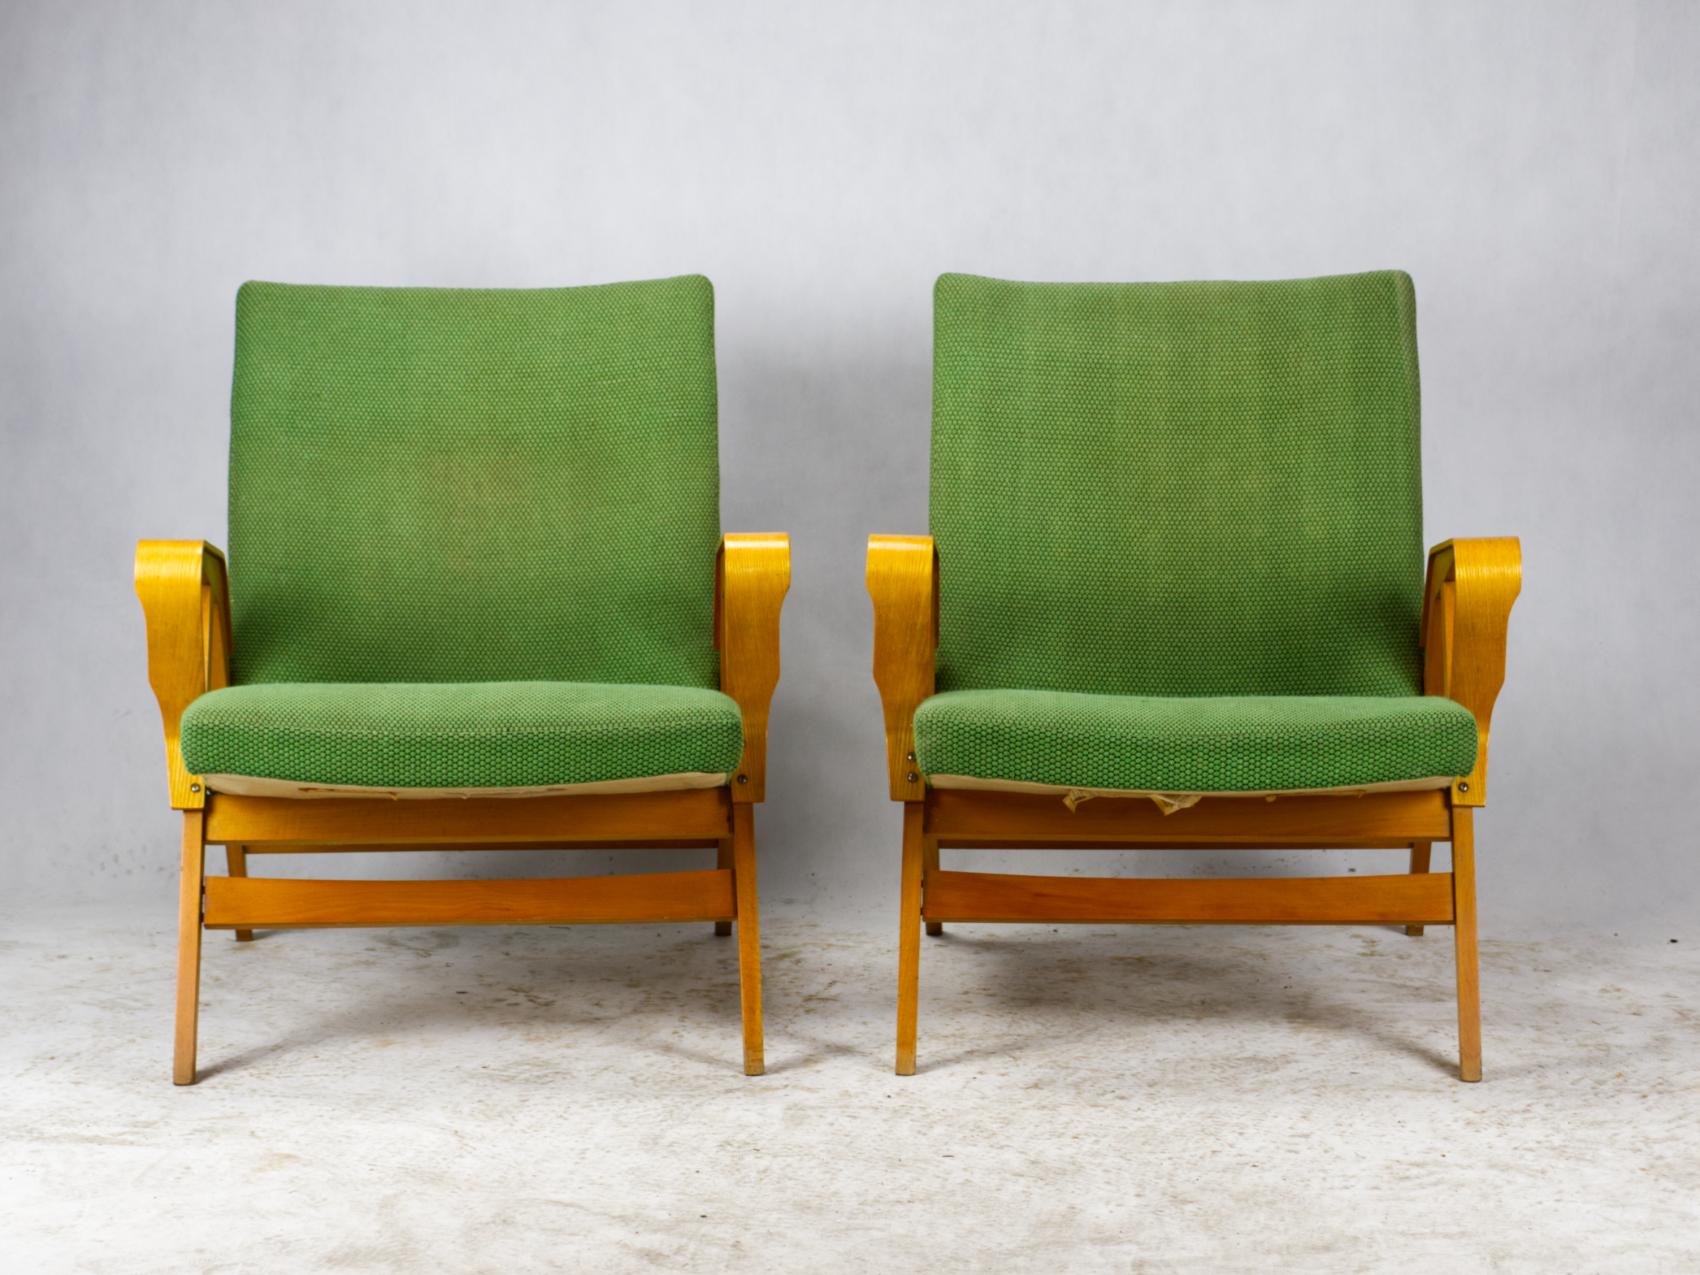 Armchairs produced by Tatra Nábytok Czechoslovakia, in the 1960s in original upholstery.
The chairs are in a good vintage condition, upholstery is a faded and wood is in good condition.
Very comfortable larger model with original labels.
   
  